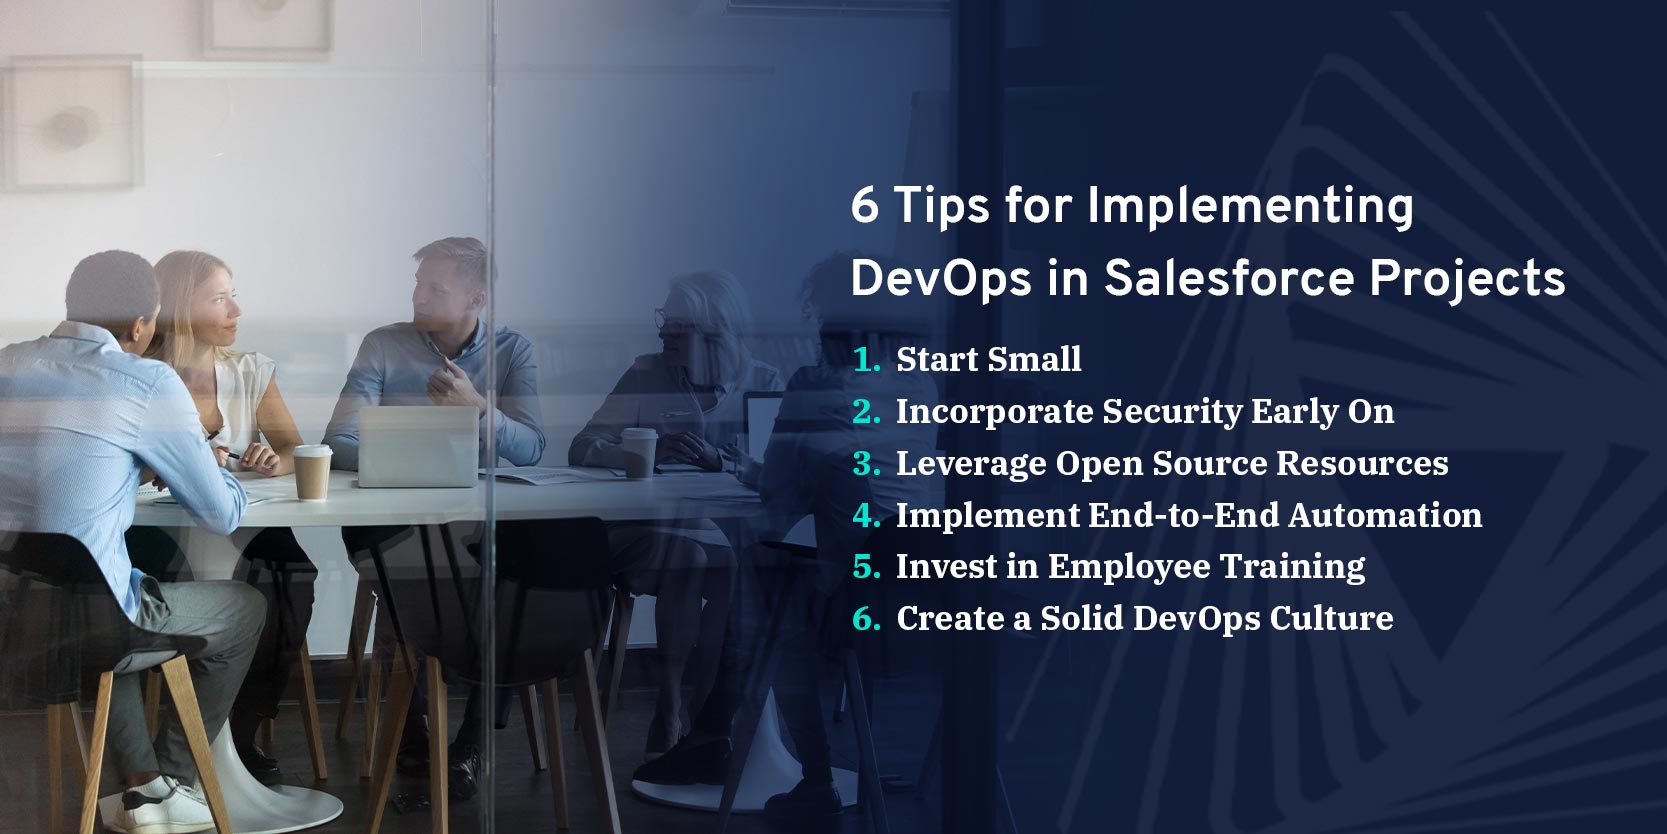 6 Tips for Implementing DevOps in Salesforce Projects